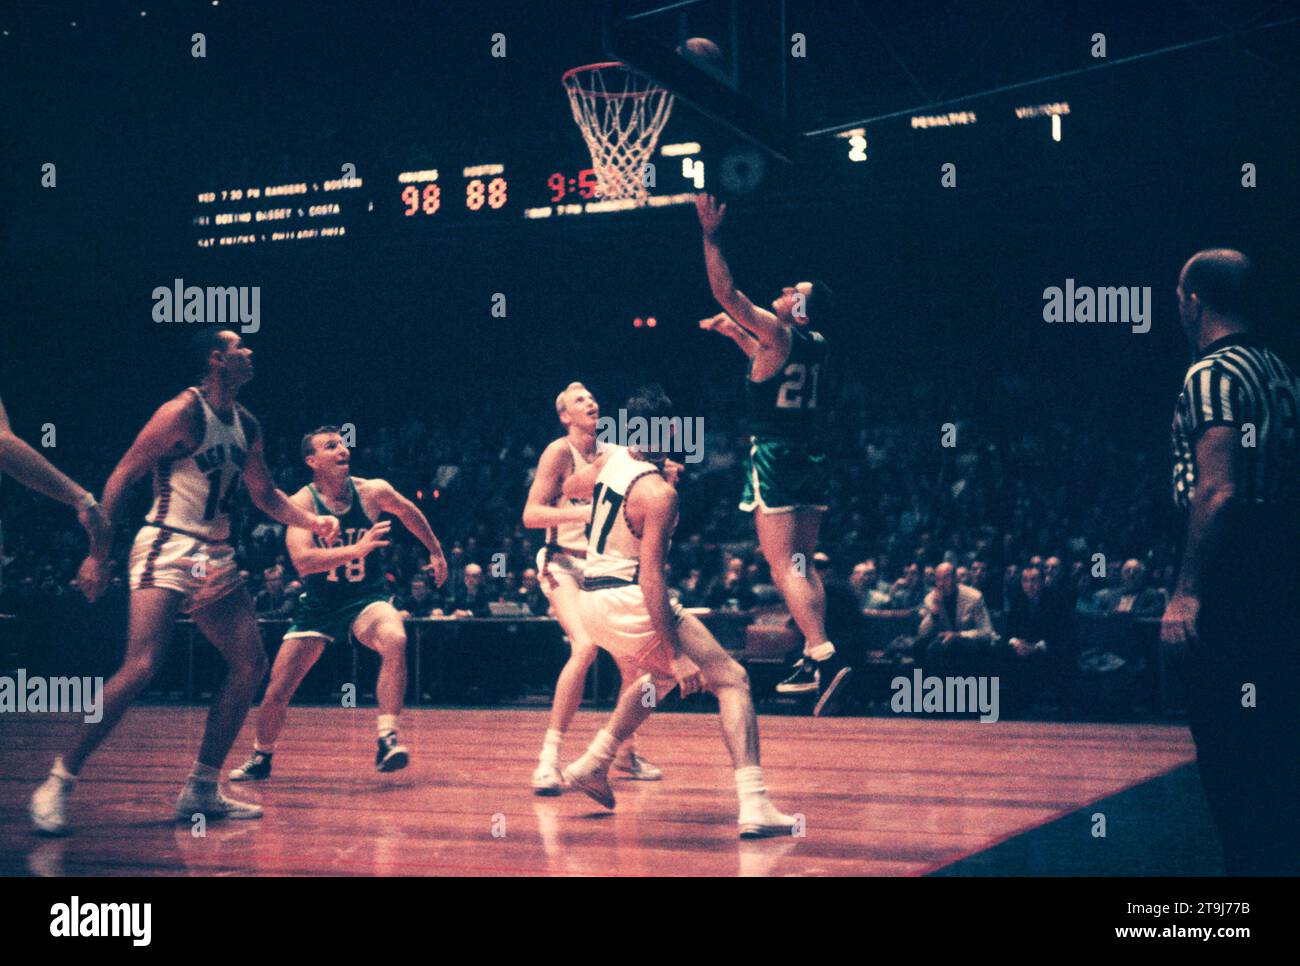 NEW YORK, NY - OCTOBER 25: Bill Sharman #21 of the Boston Celtics goes for the lay-up as Ron Sobie #17 of the New York Knicks defends during an NBA game on October 25, 1958 at the Madison Square Garden in New York, New York.  (Photo by Hy Peskin) *** Local Caption *** Bill Sharman;Ron Sobie Stock Photo